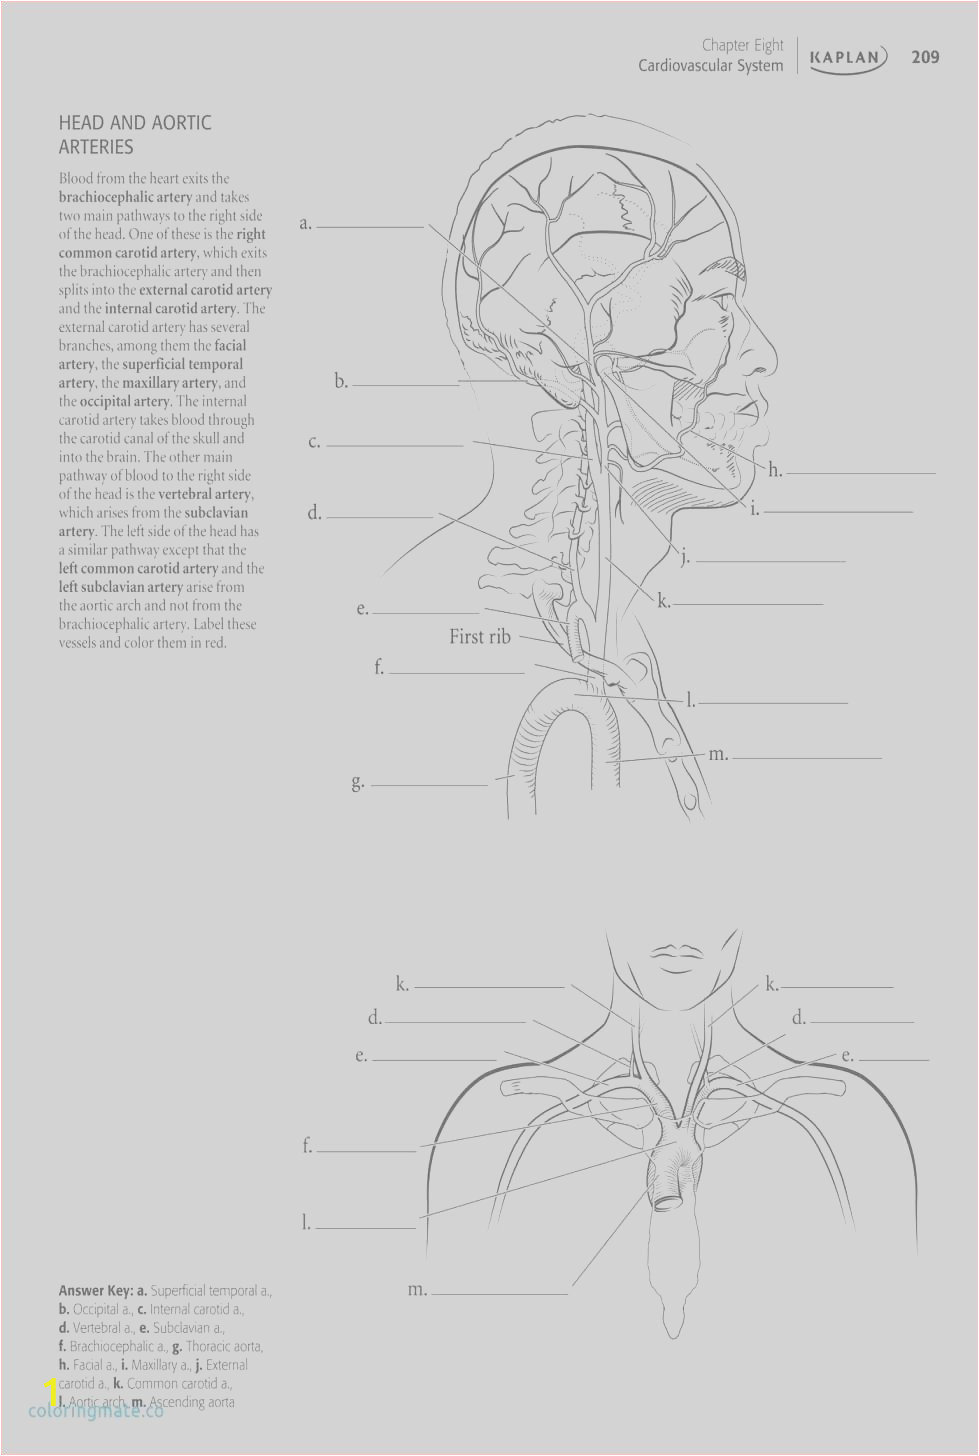 Anatomy and Physiology Coloring Workbook Page 188 Answers 14 Beautiful Gallery Anatomy and Physiology Coloring